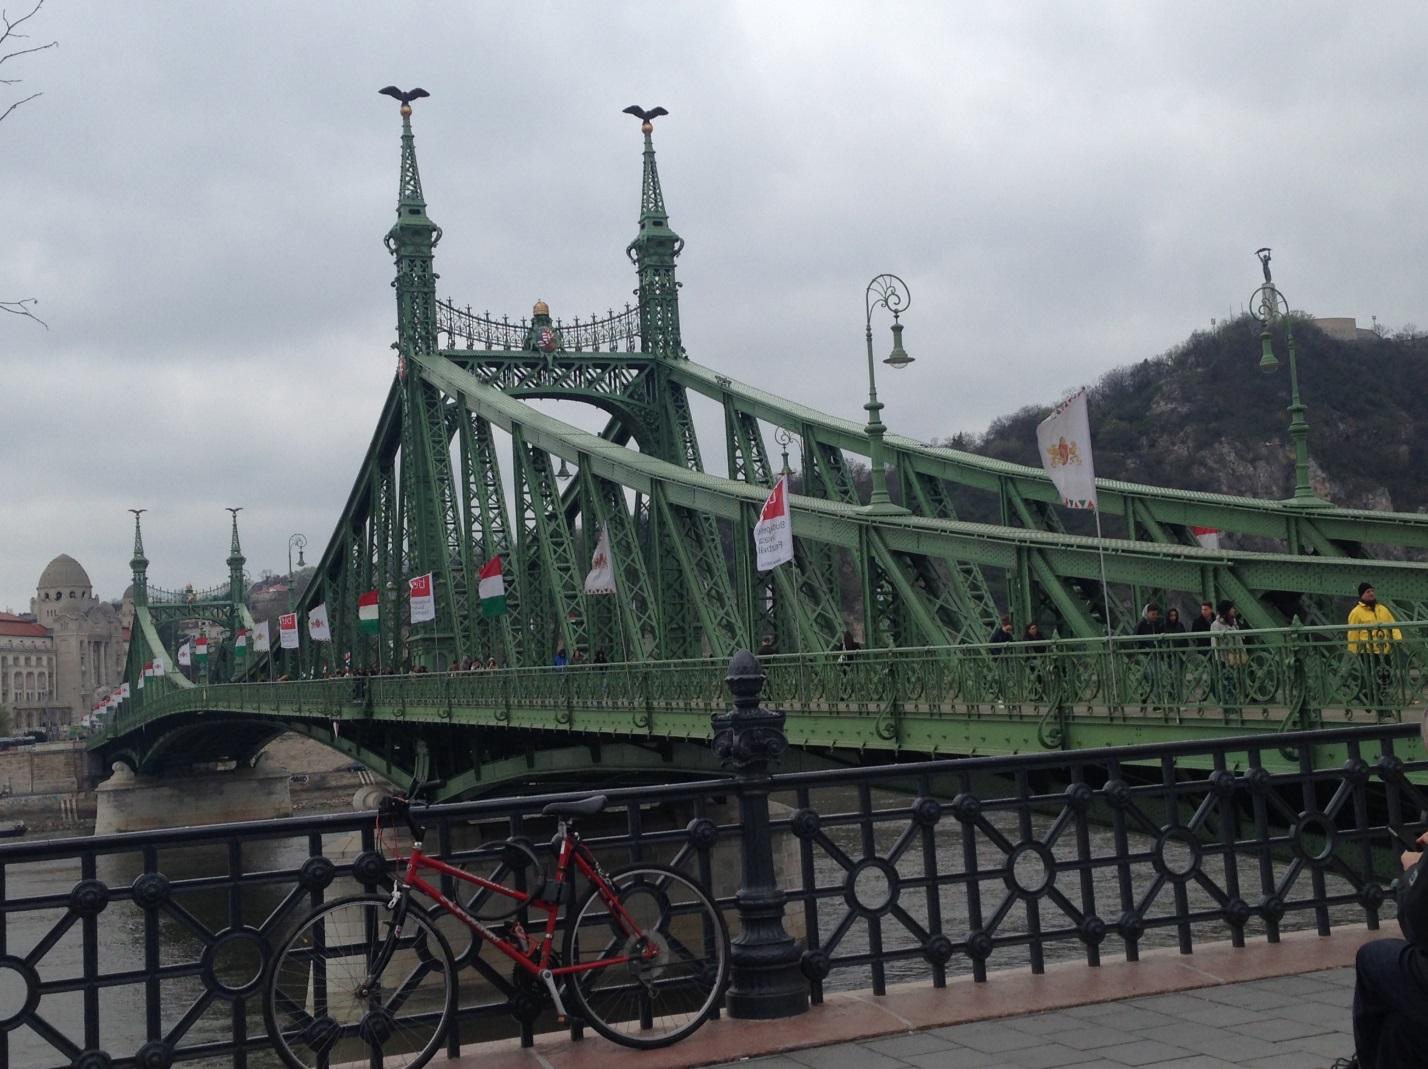  The Liberty Bridge shown above connecting Buda and Pest is located at the southern end of City Center.   